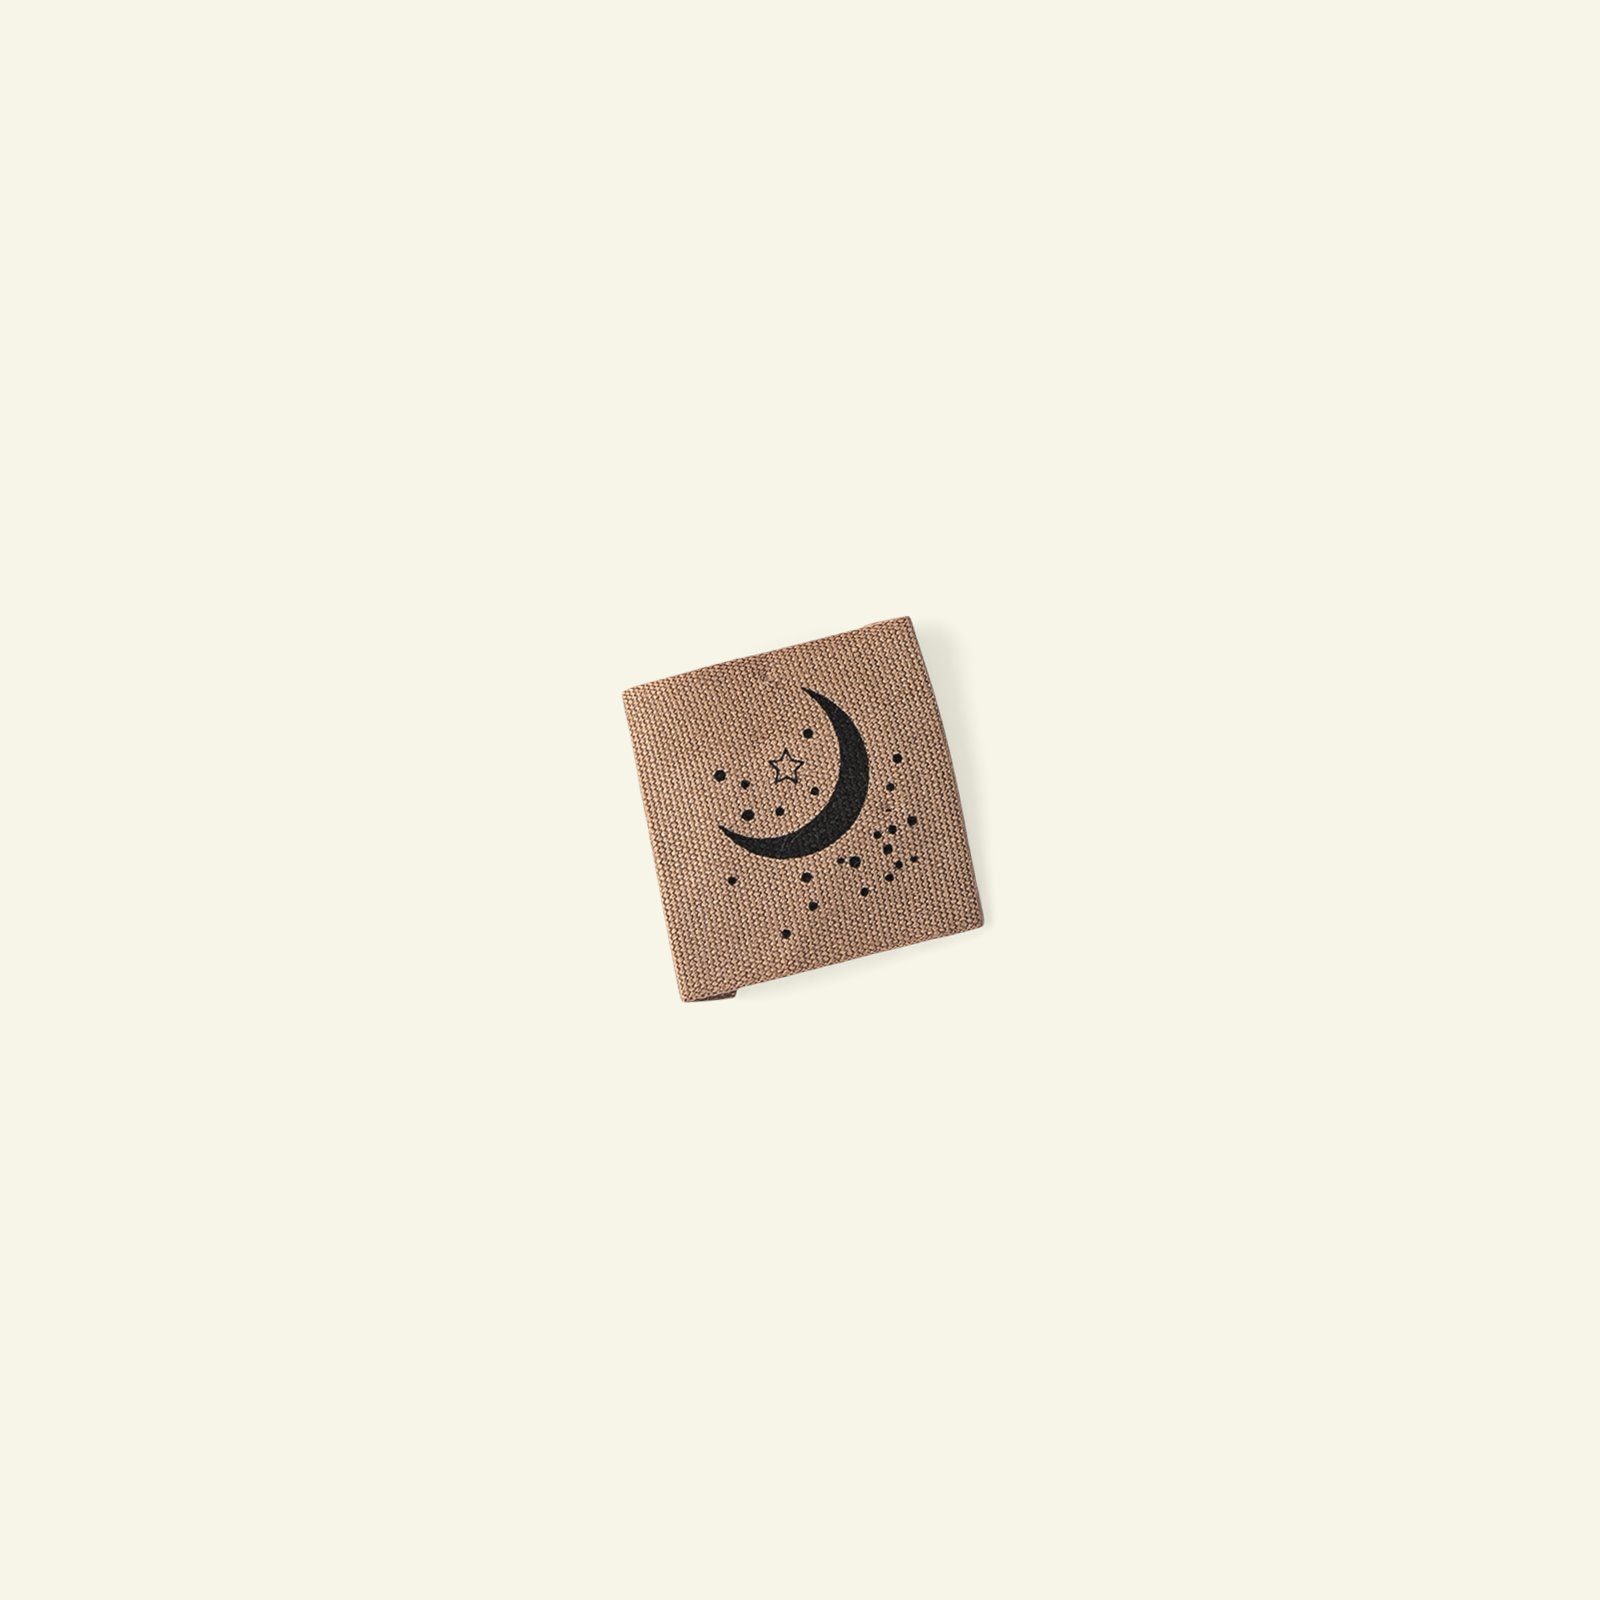 Patch moon 30x30mm caramel 1pc 24877_pack